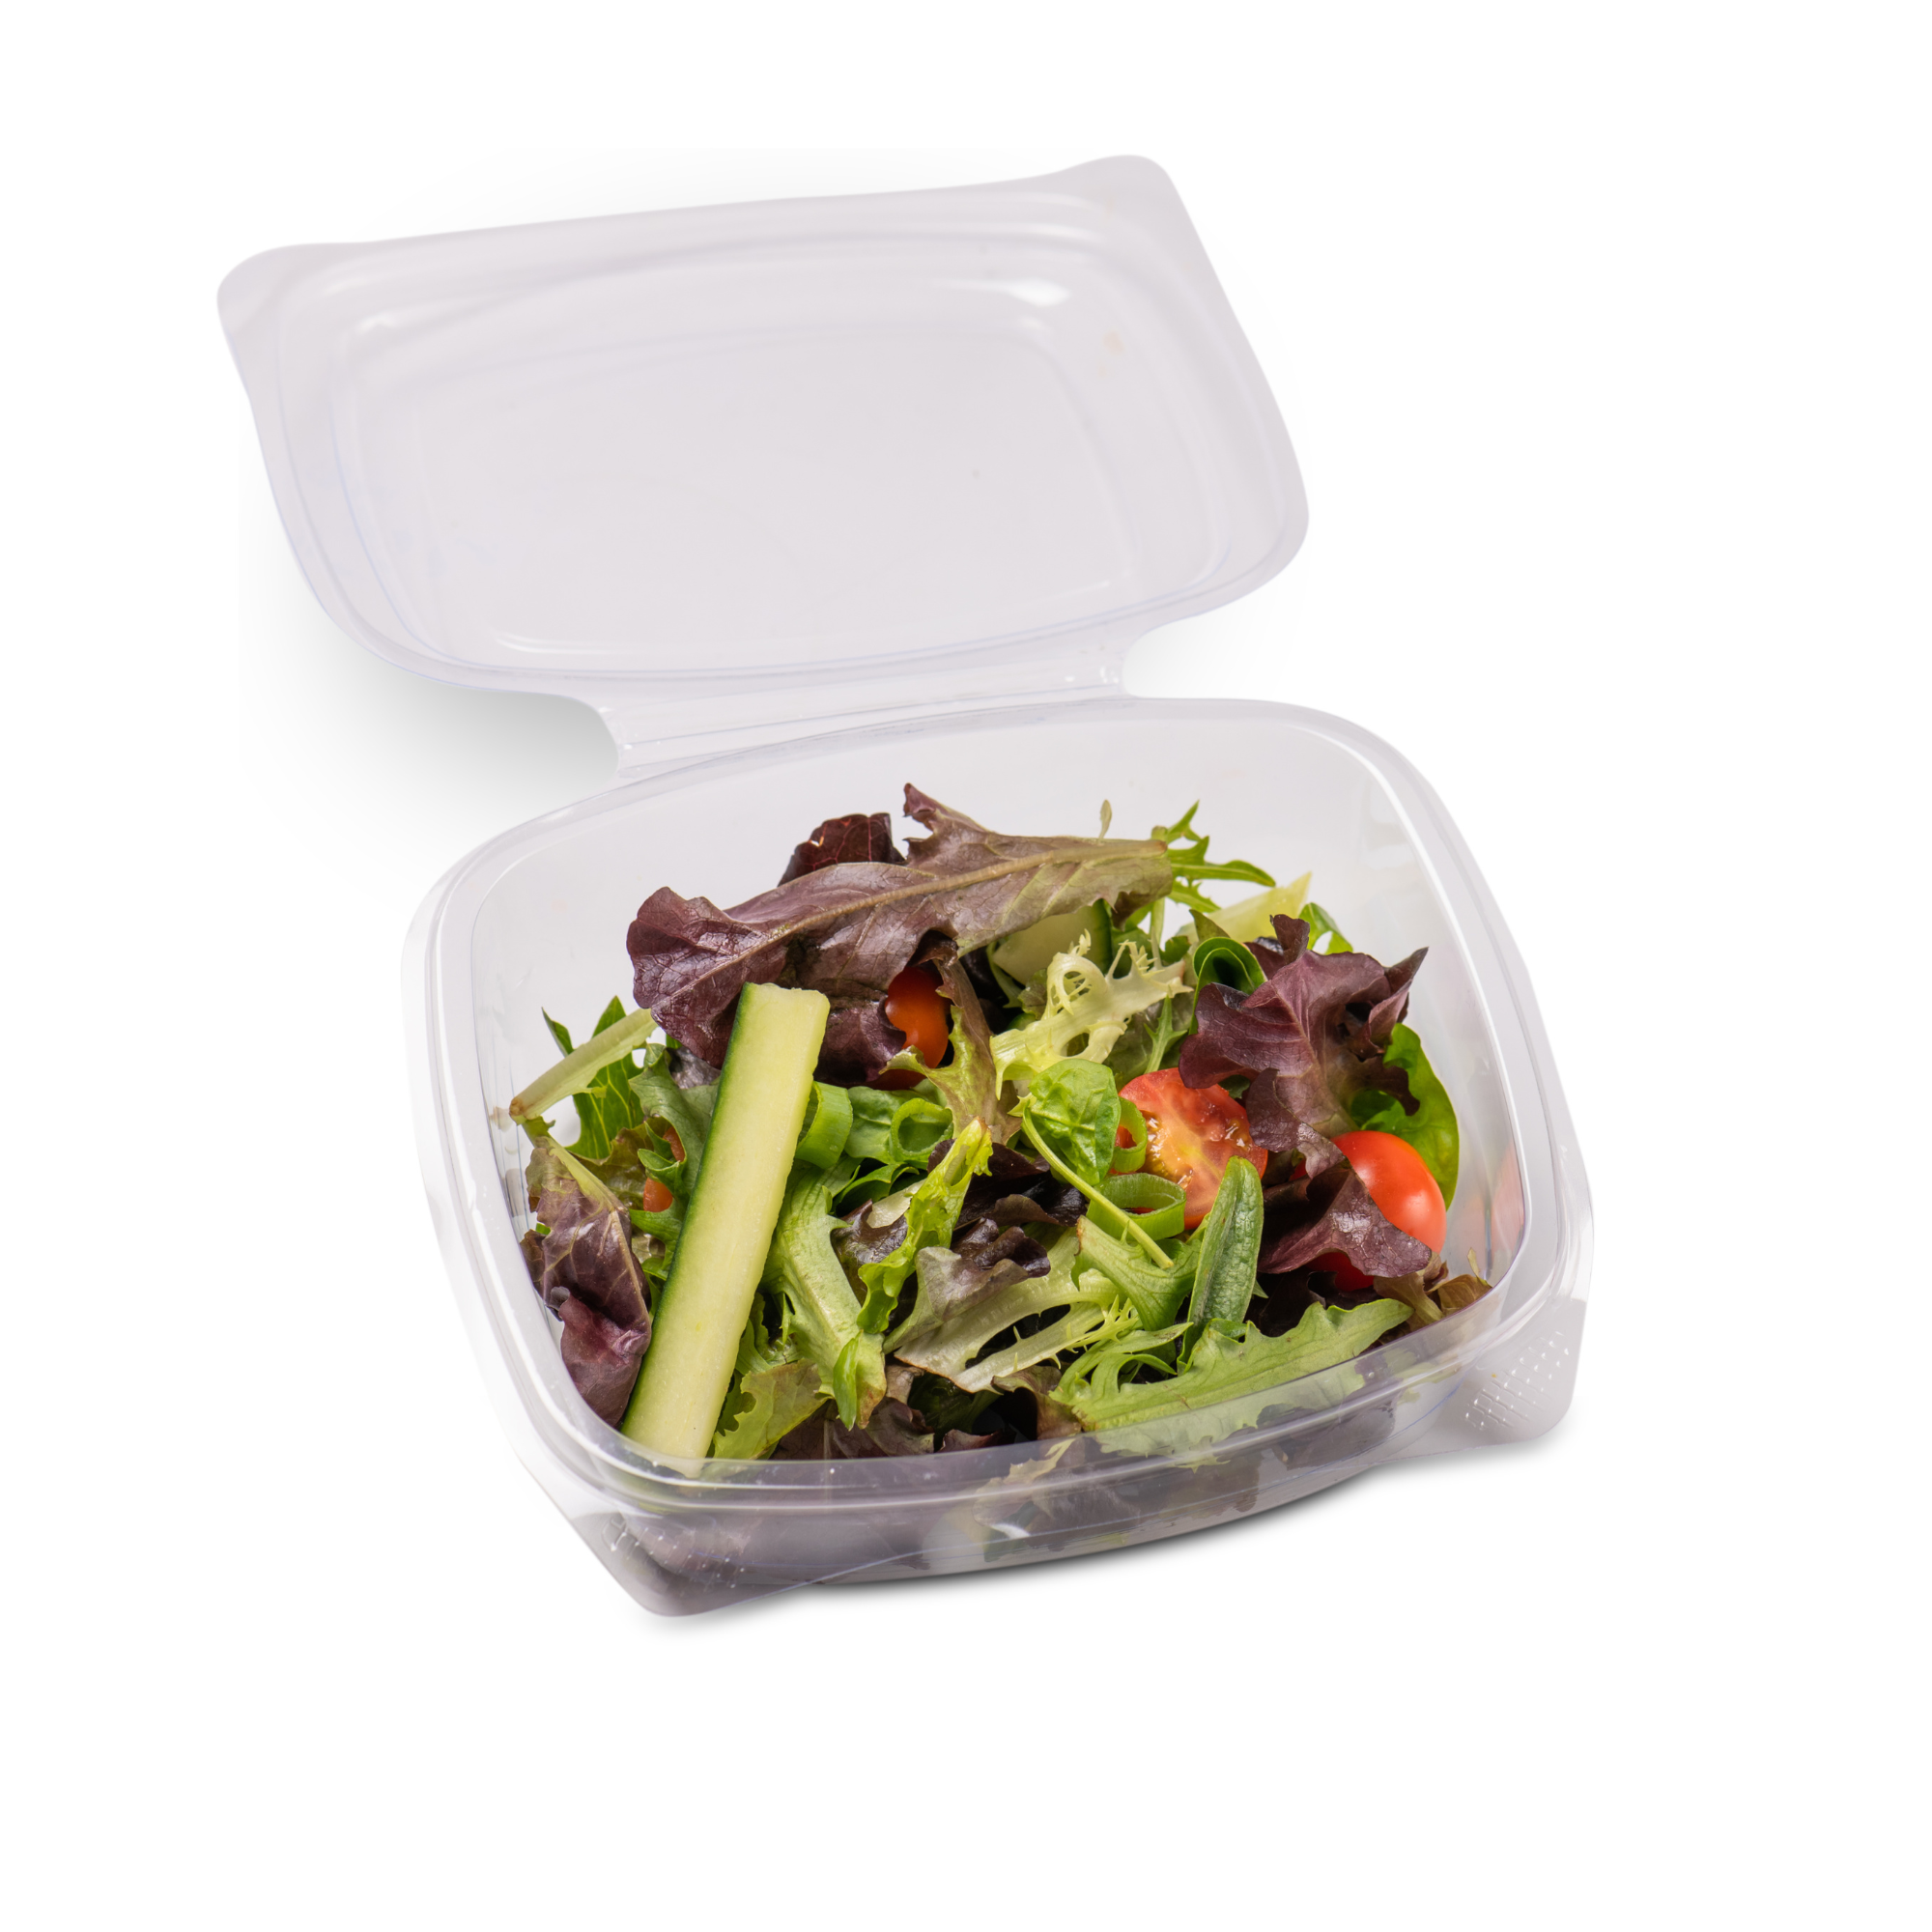 Vegware Vhd-08 Hinged Deli Container 8 oz PLA Pack of 300